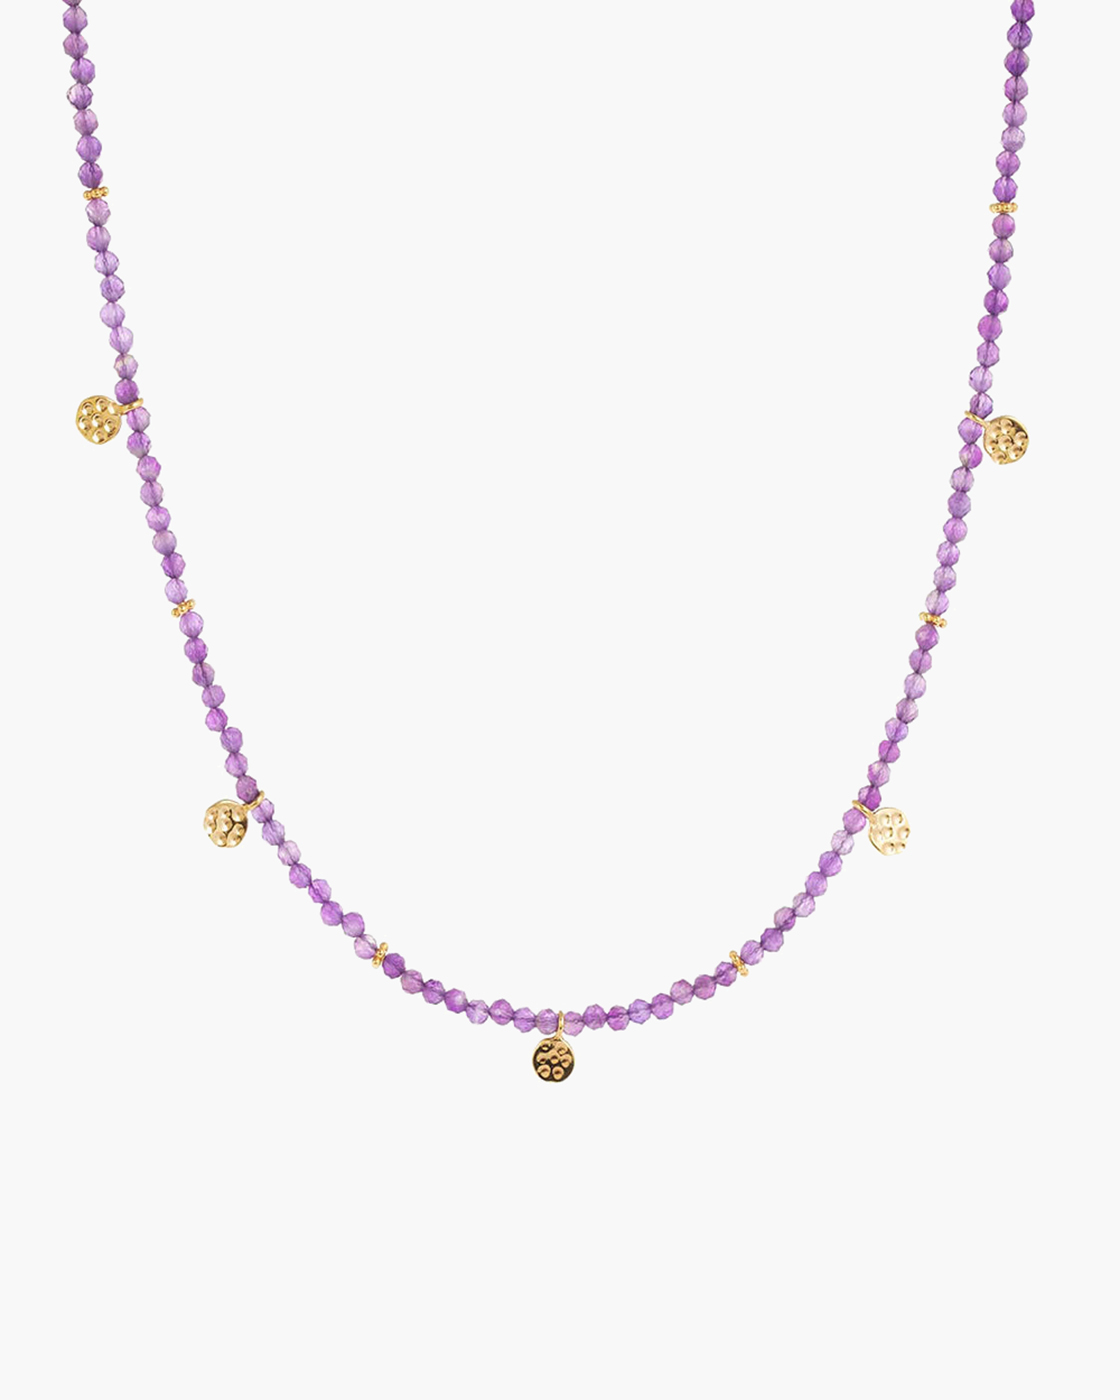 Amethyst Beaded Reversible Necklace with gold discs